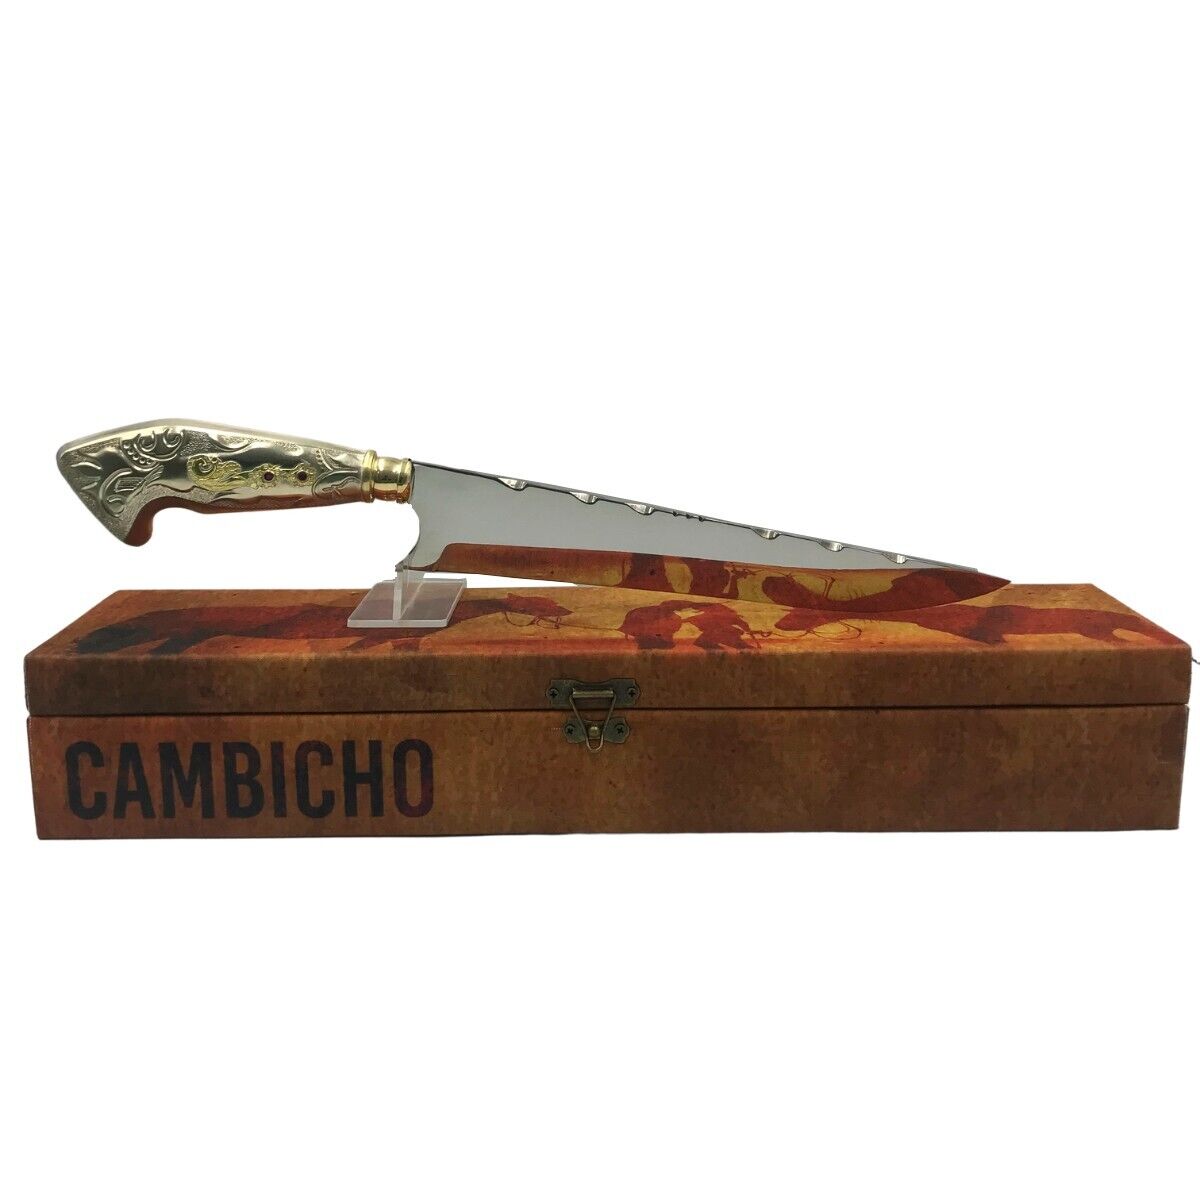 BV Cambicho 10 Inch. Handle in Alpaca Genuine Surgical Steel